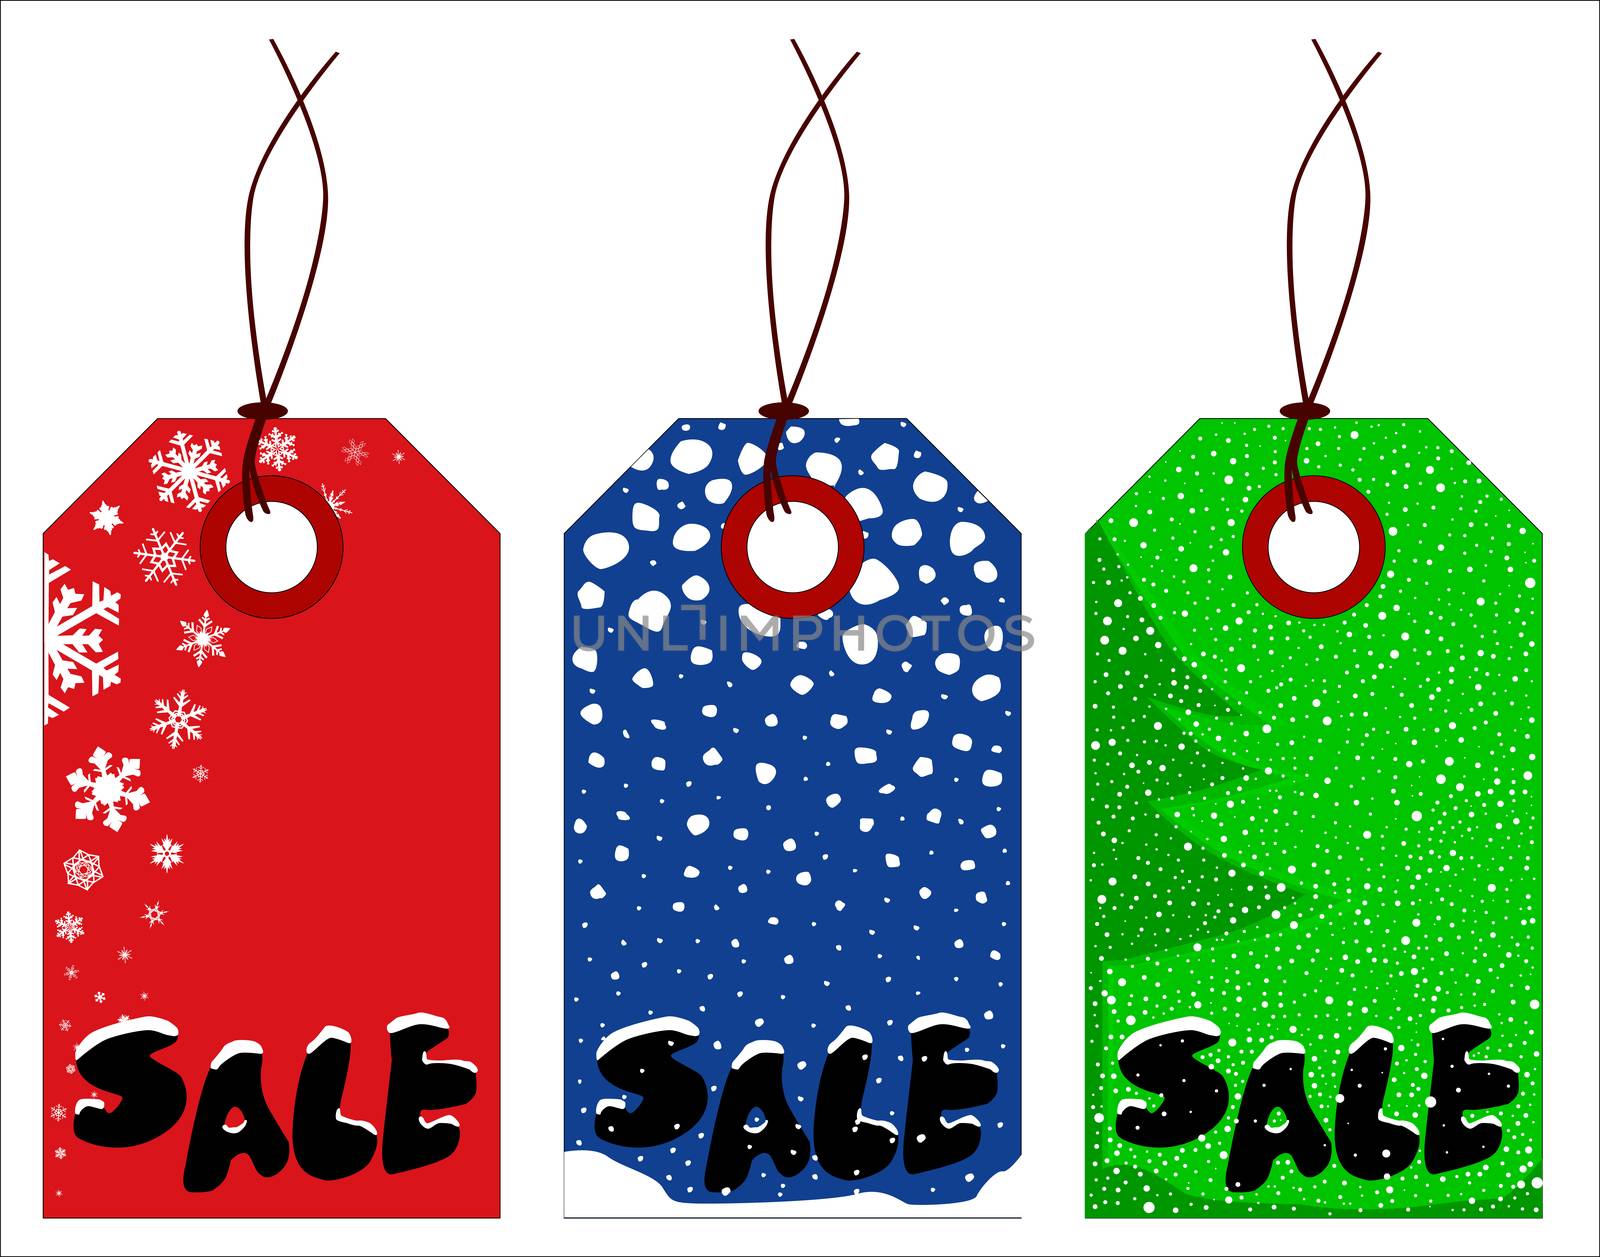 A collection of three Christmas tags in different colors with origibal vector text.